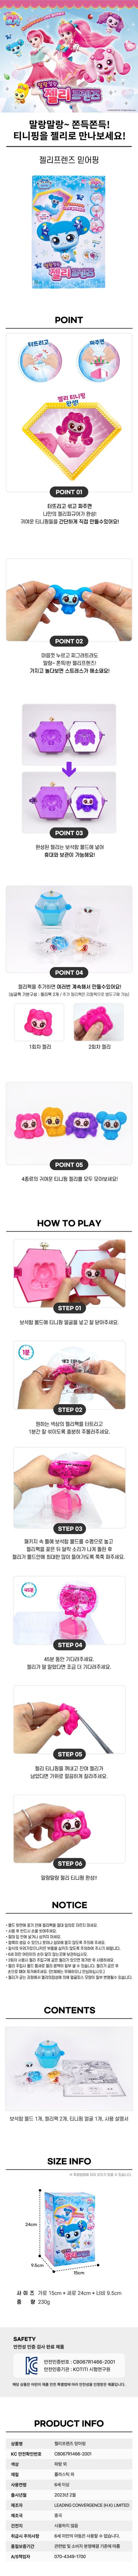 Catch Teenieping Soft Jelly 4 Characters Friends Jelly Figure DIY Kit Korean Toy